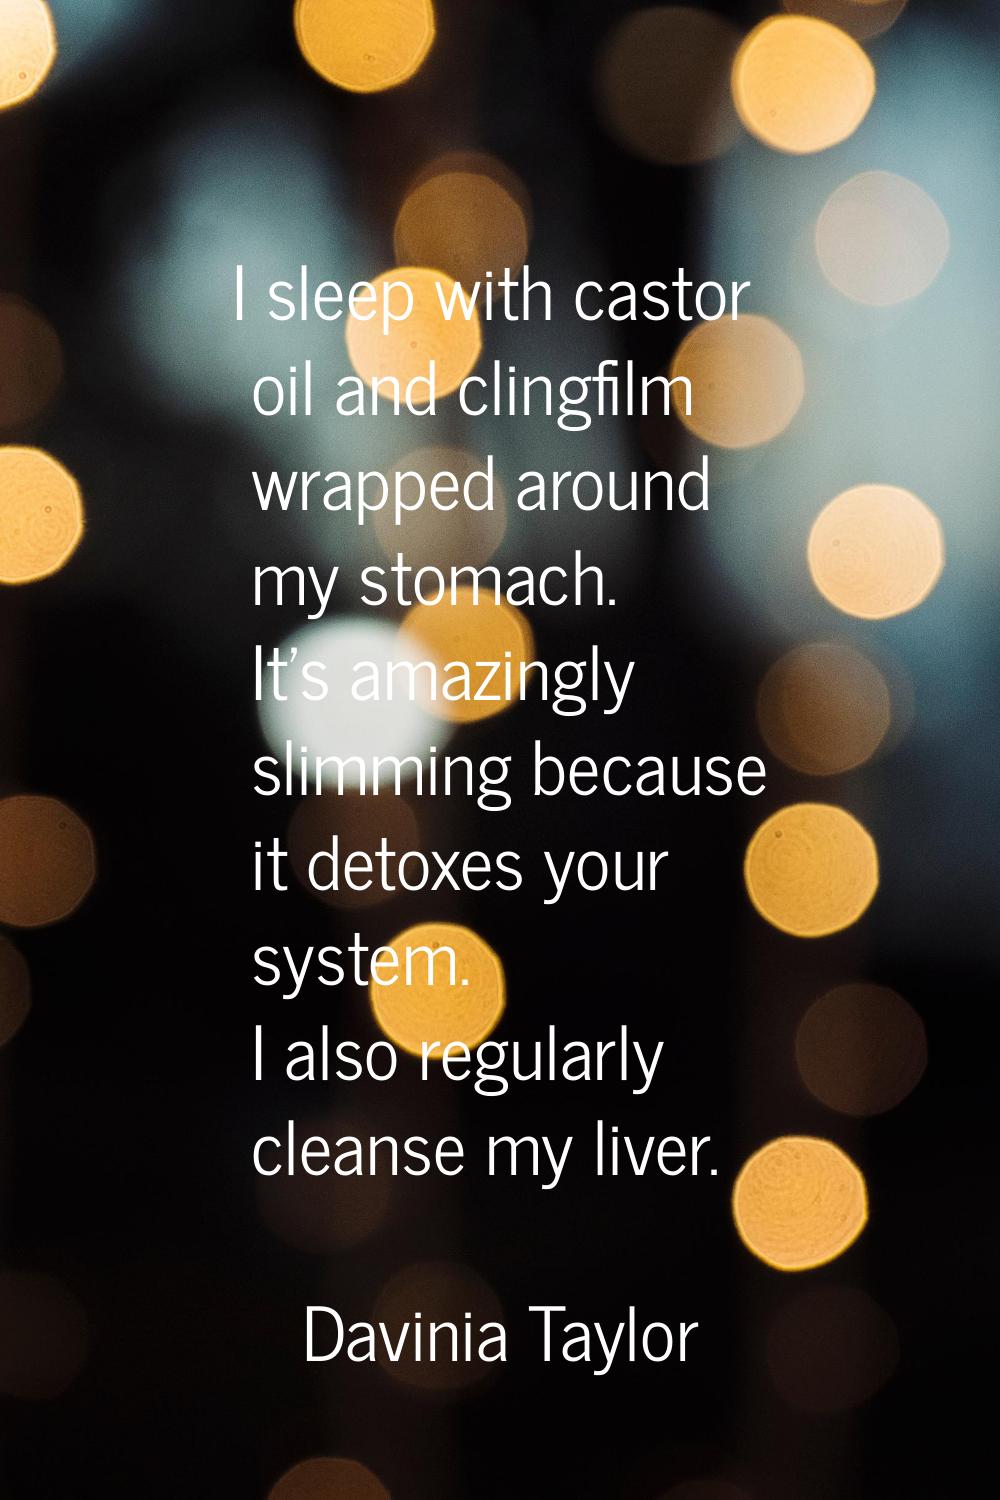 I sleep with castor oil and clingfilm wrapped around my stomach. It's amazingly slimming because it